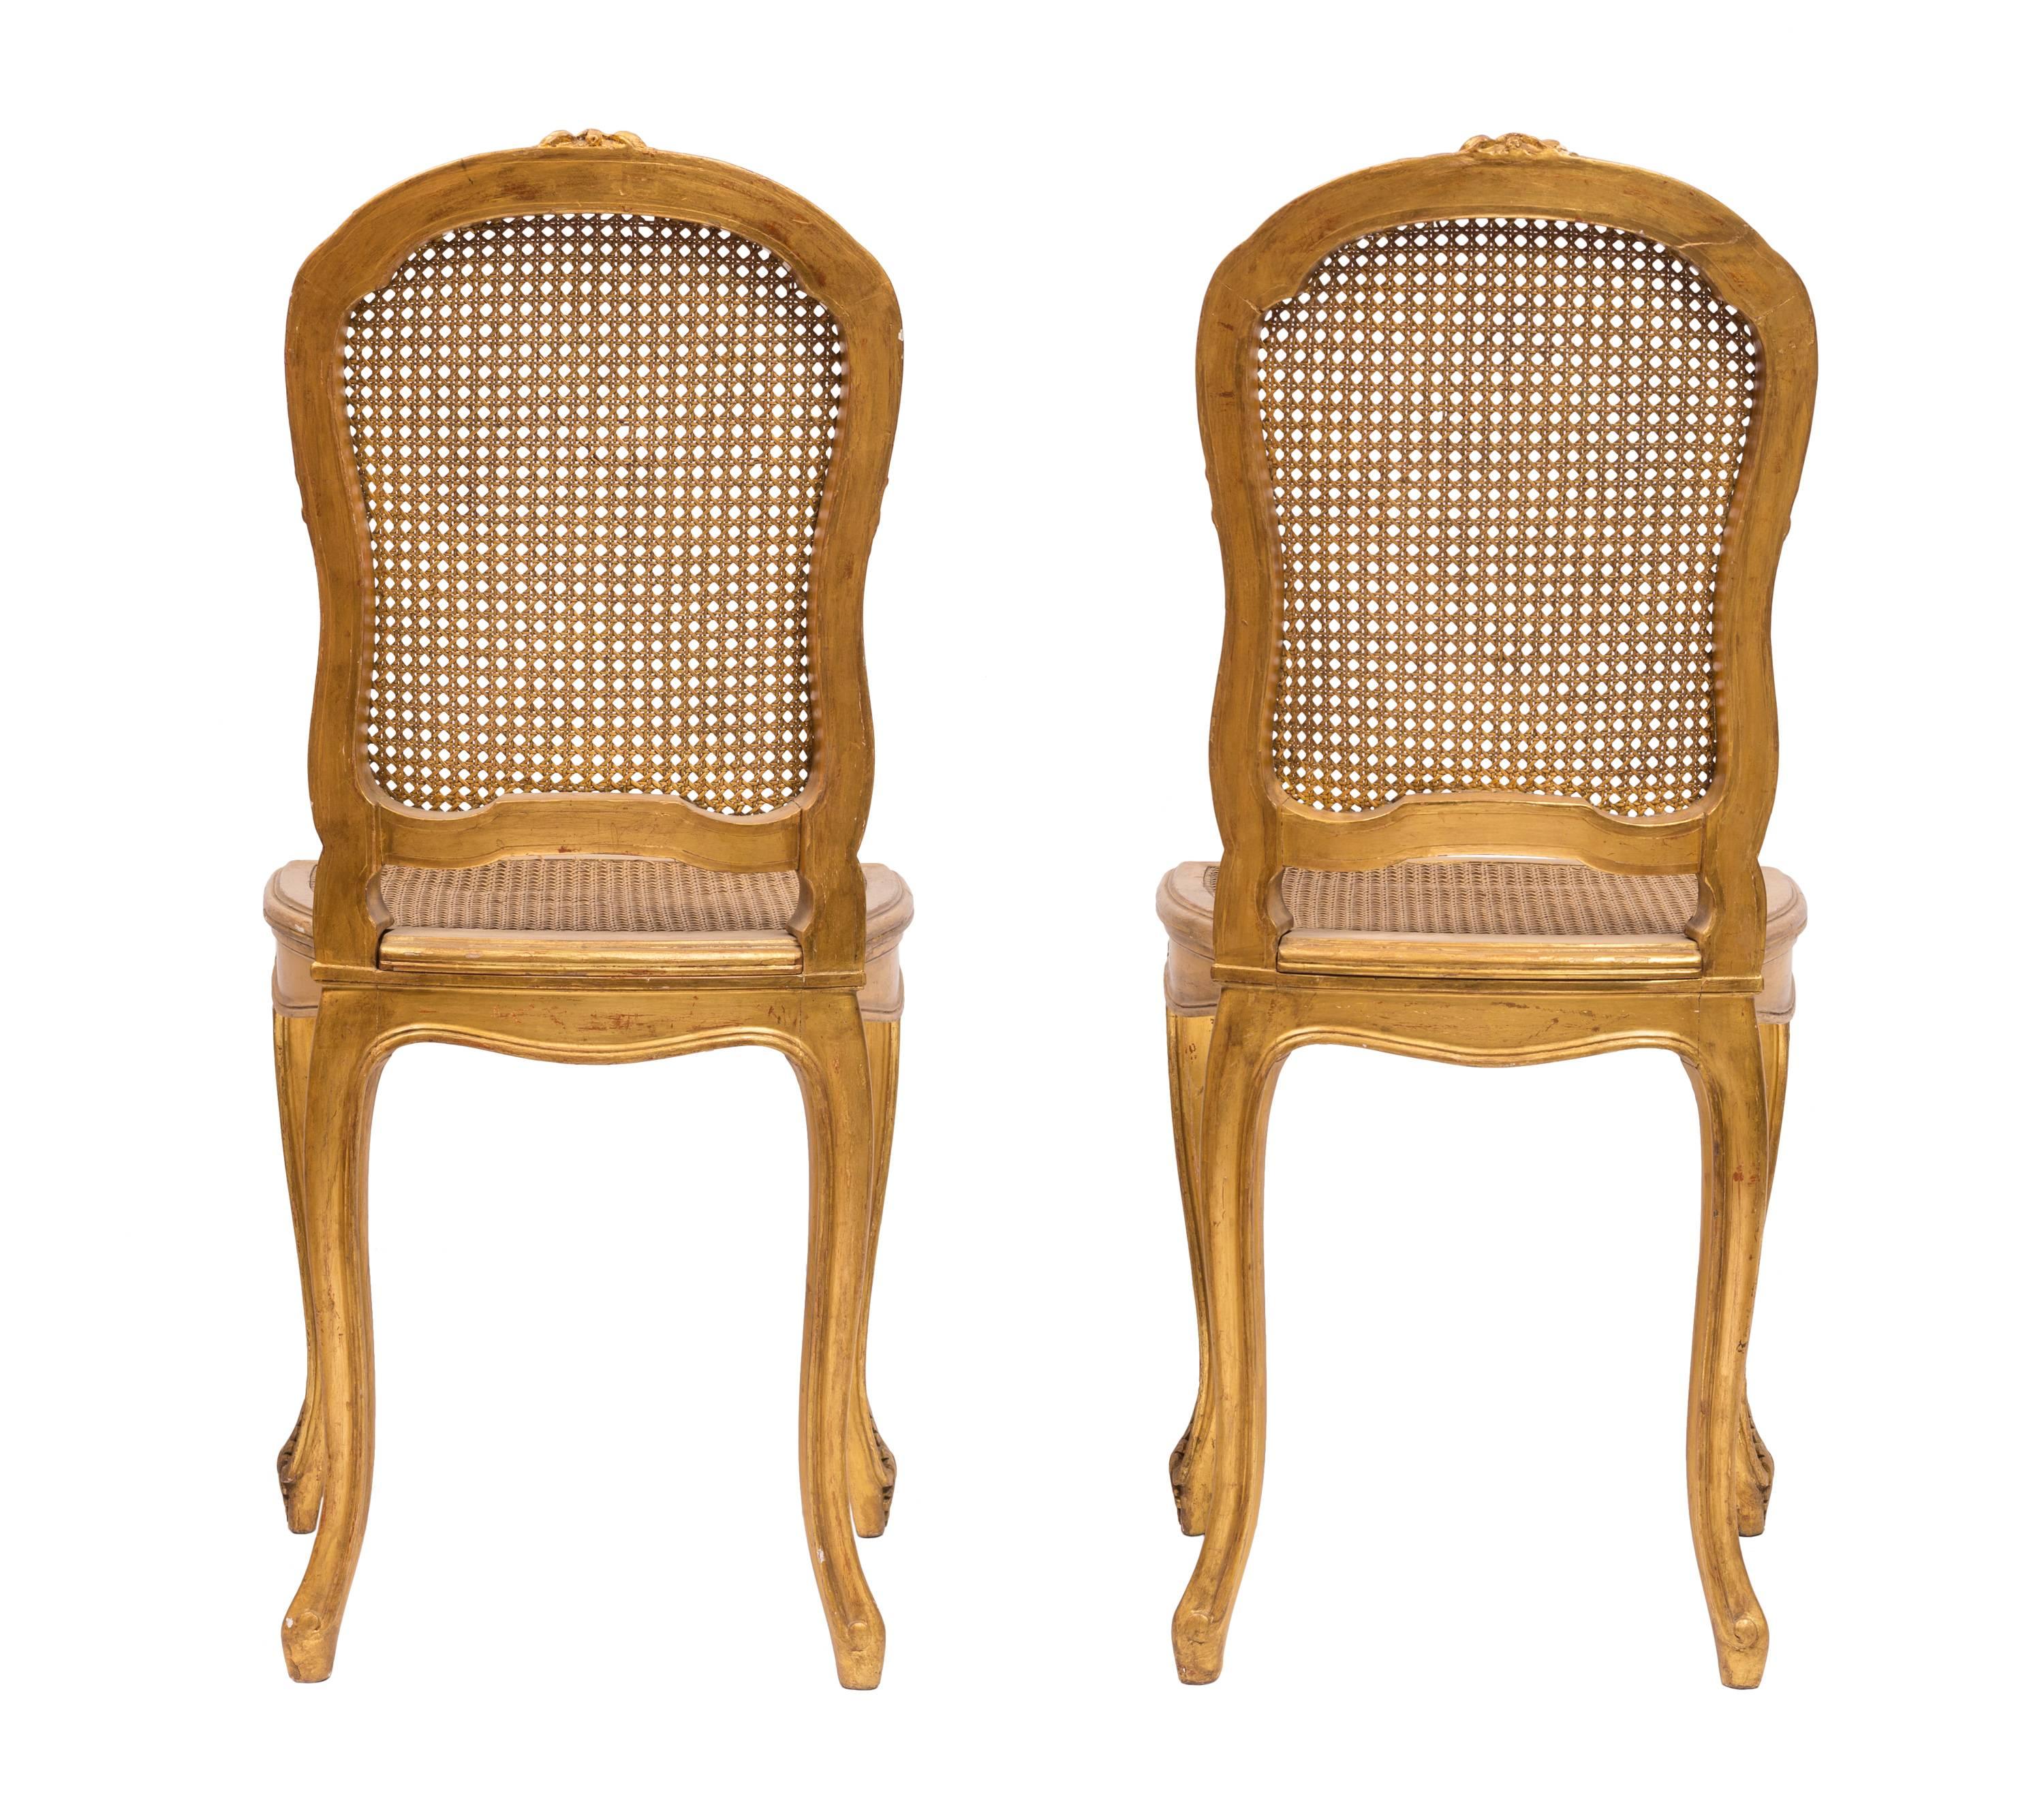 Hand-Carved Pair of 19th Century French Louis XV Giltwood Cane Back Chairs